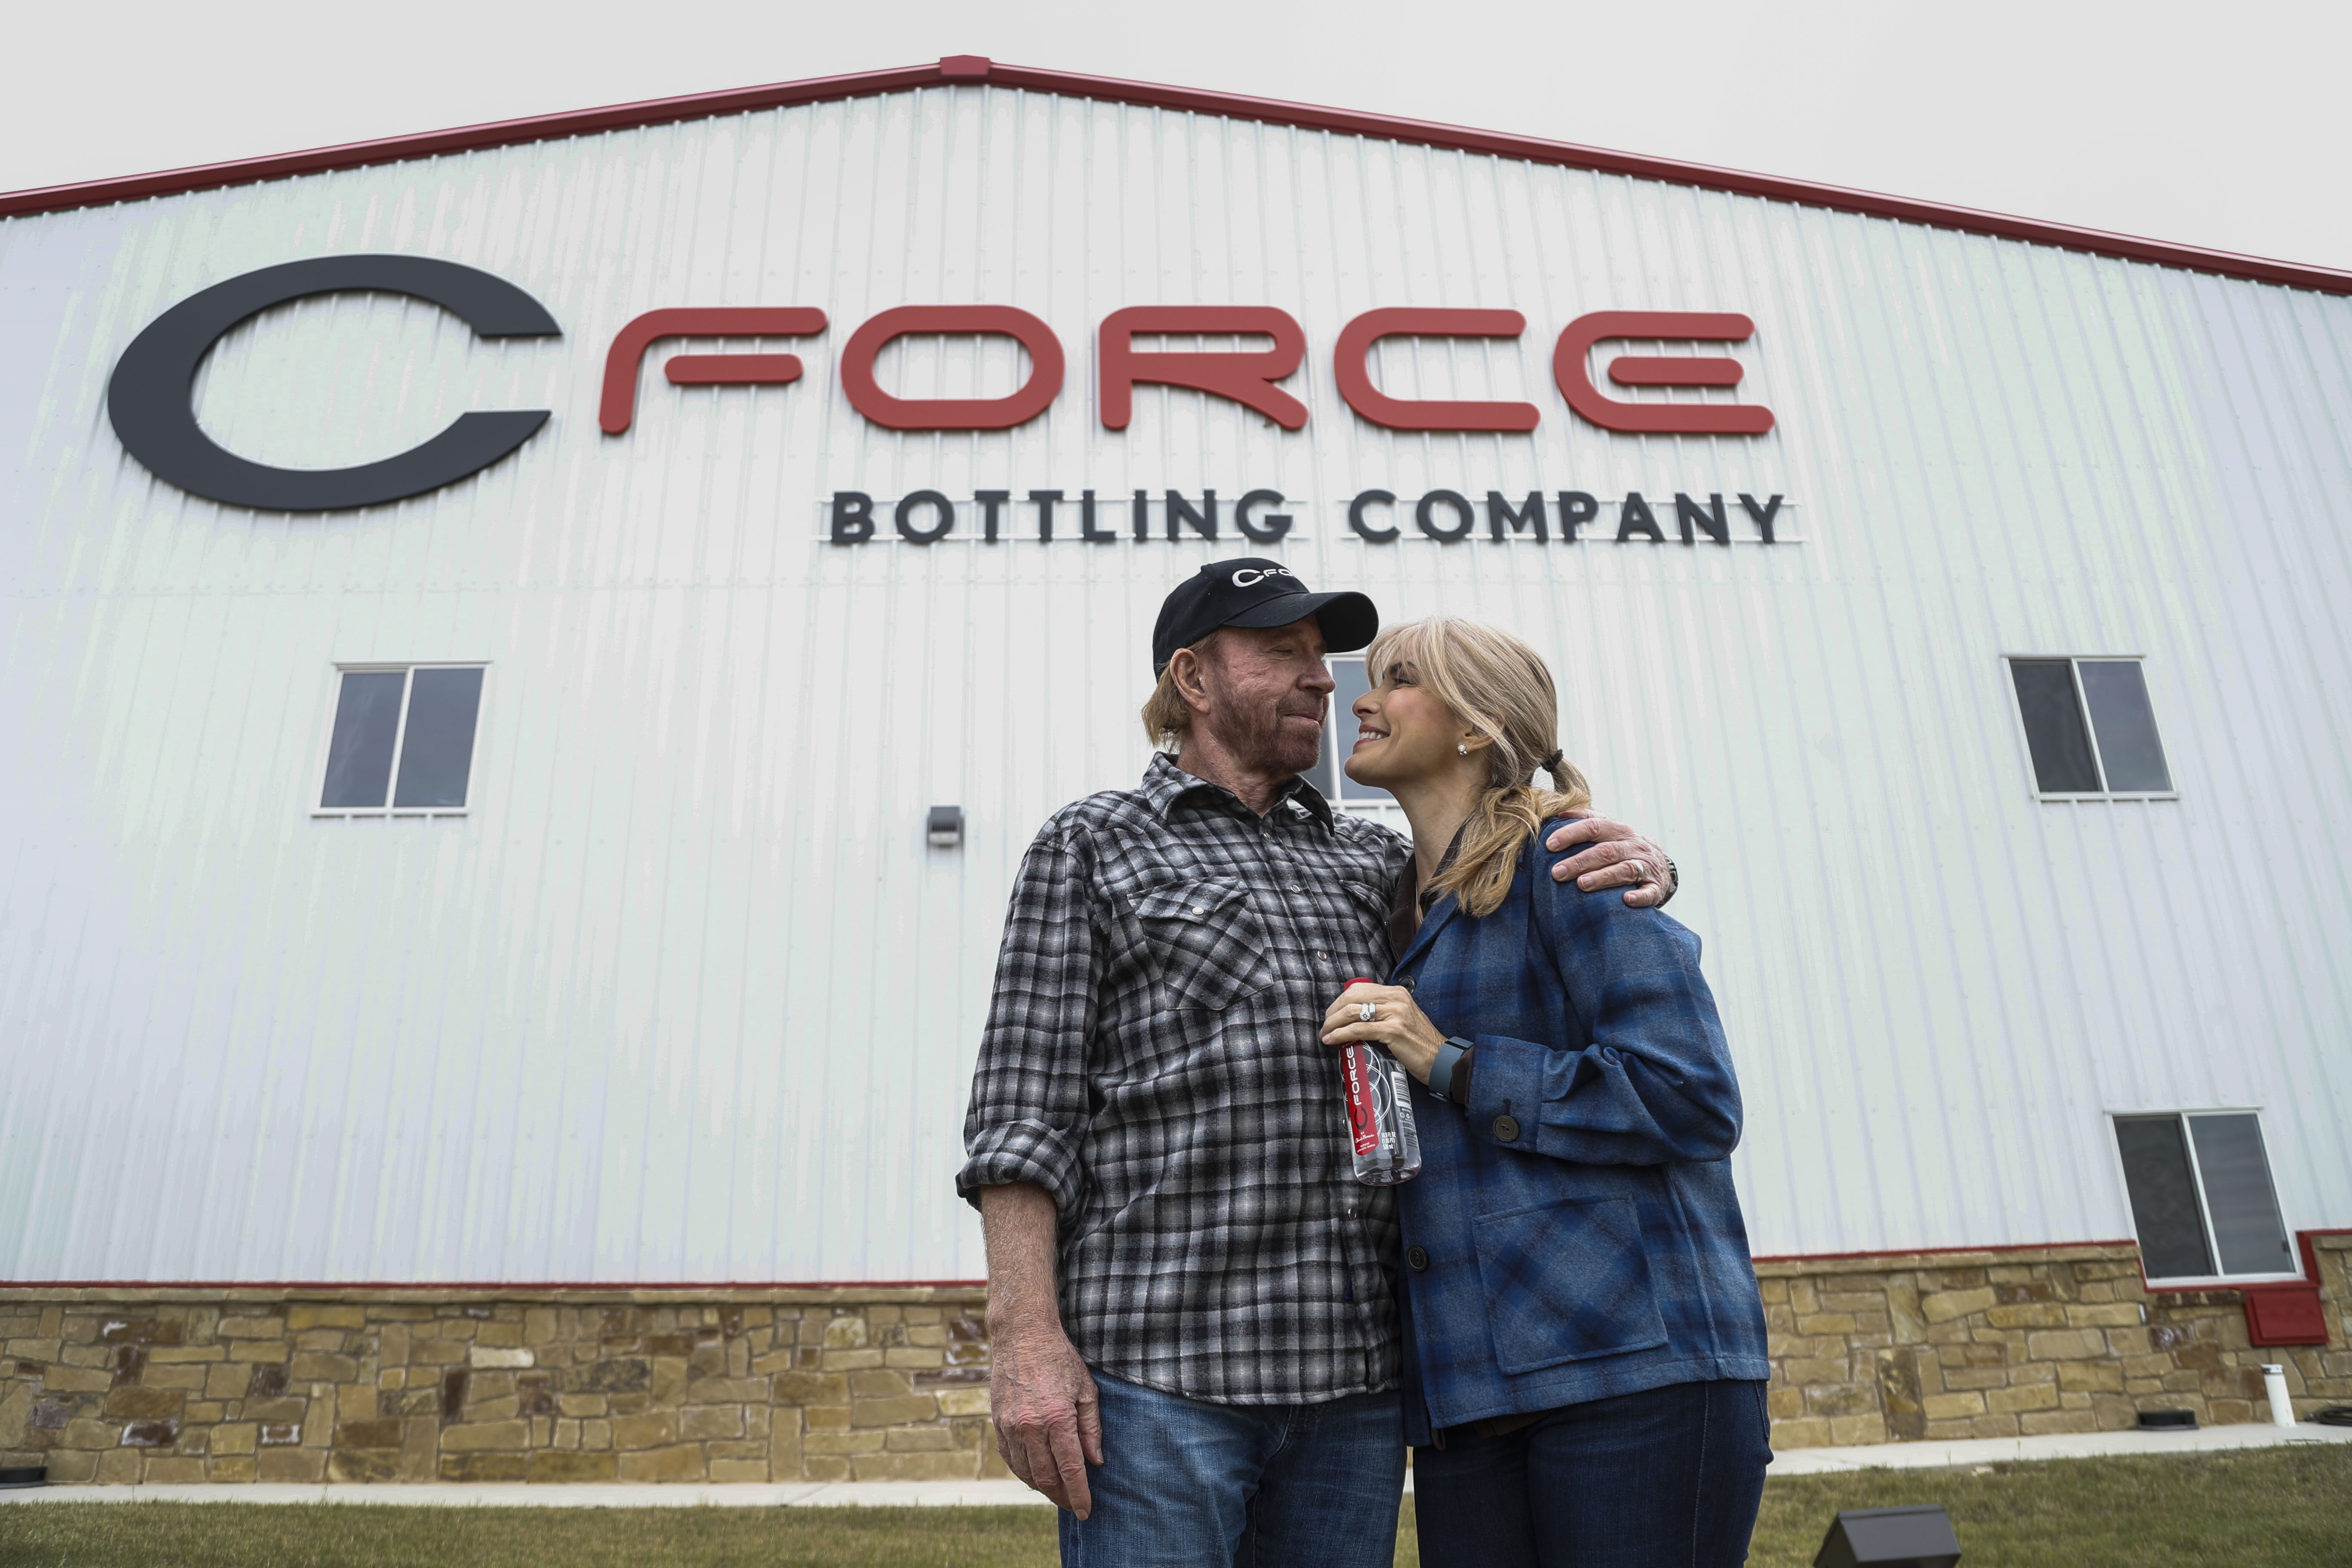 Chuck Norris and Gena O'Kelley, have a new line of bottled water called CFORCE that is bottled on his Navasota ranch, photographed, January 4, 2017. | Source: Getty Images